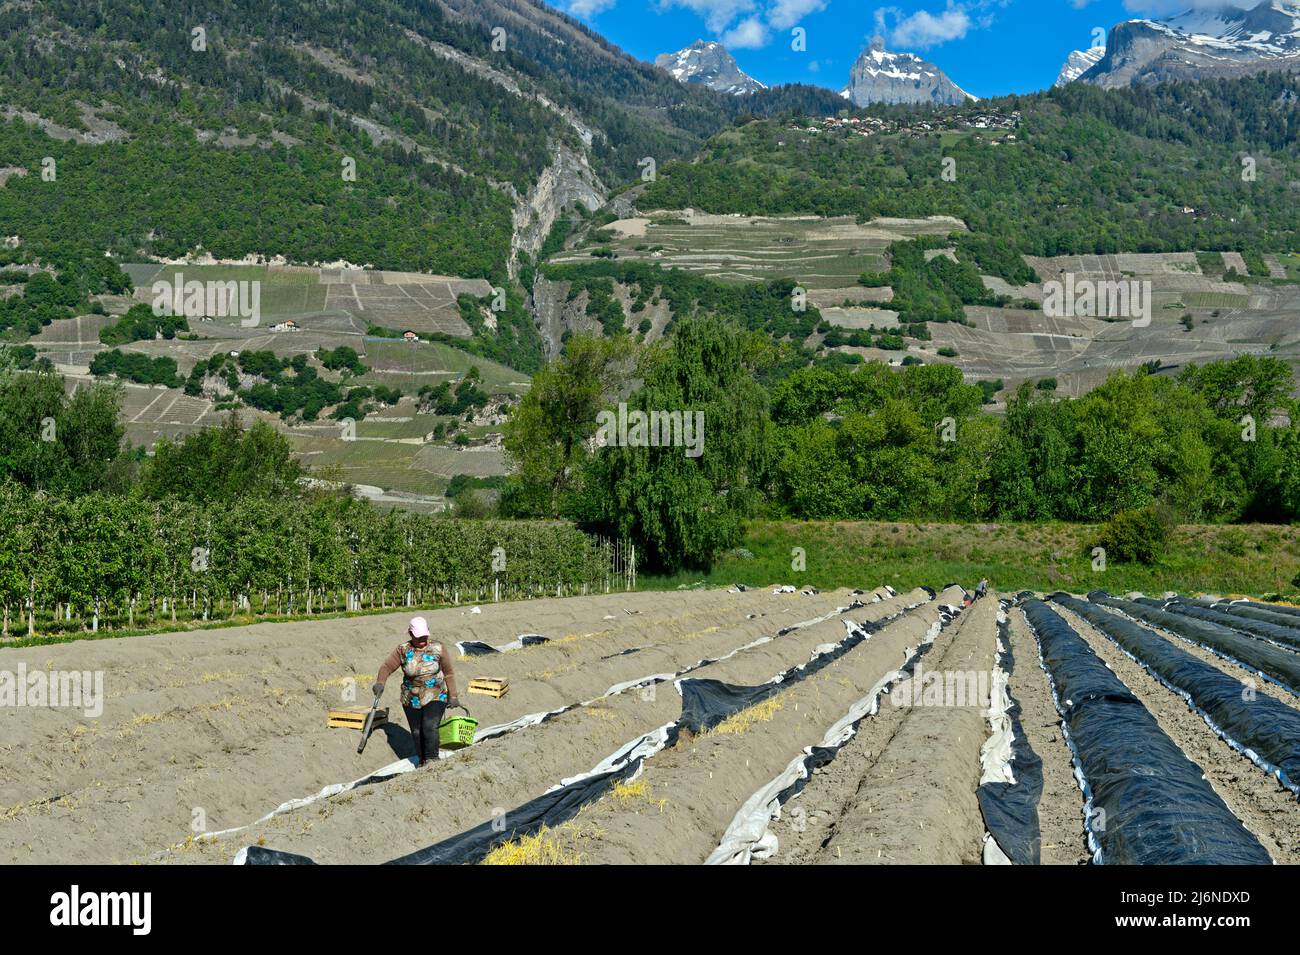 Harvest worker with a basket of asparagus in an asparagus field of the Philfruits agricultural company in the Rhone Valley, Riddes, Valais, Switzerlan Stock Photo